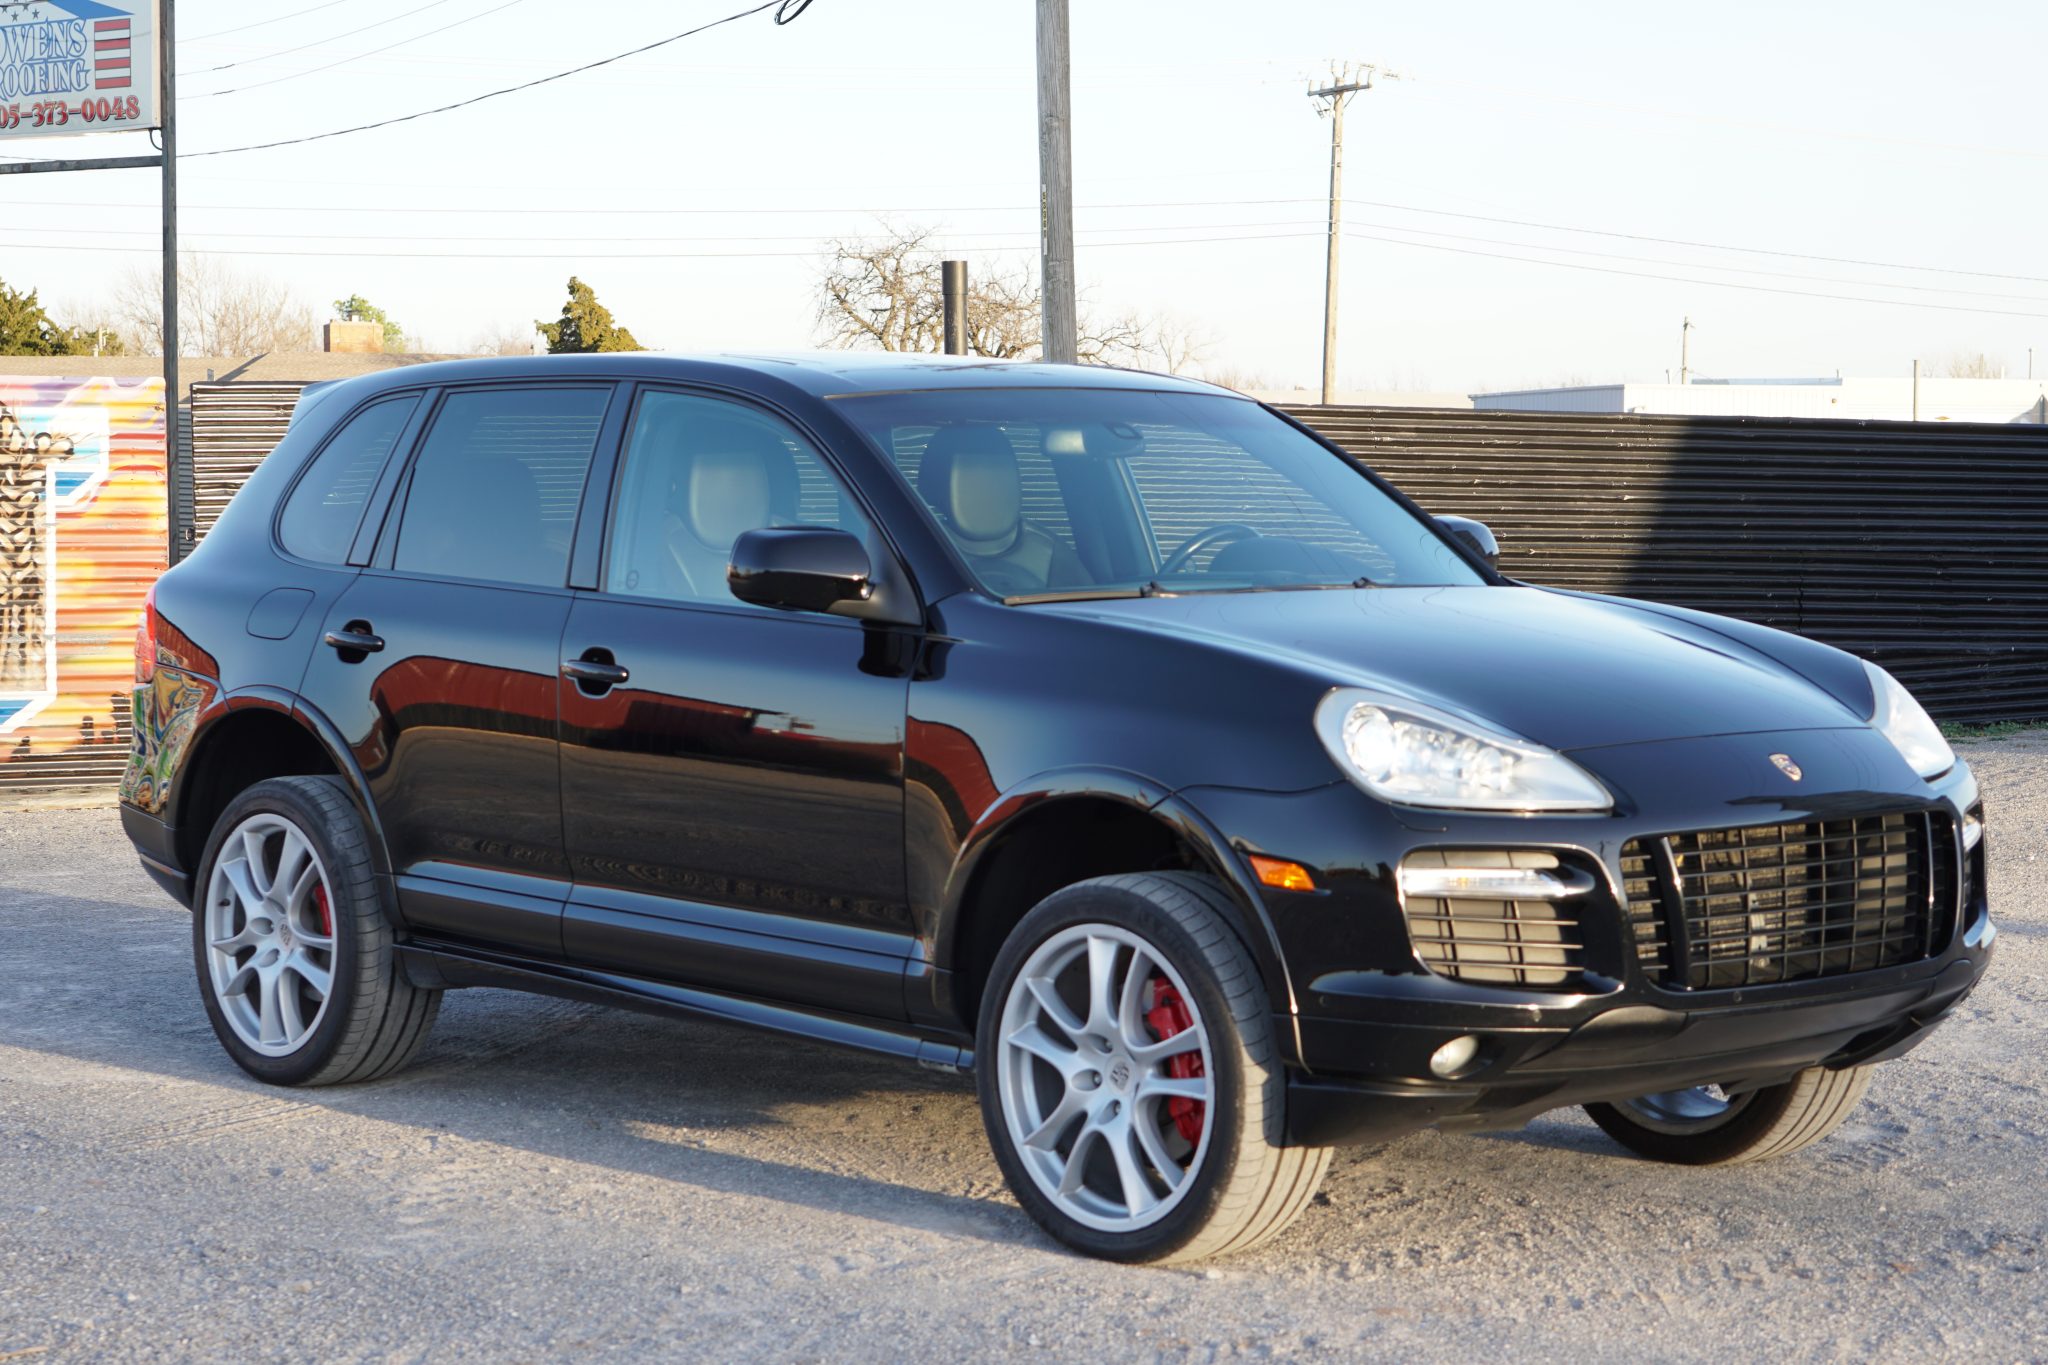 Used 2009 Porsche Cayenne GTS 6-Speed Review